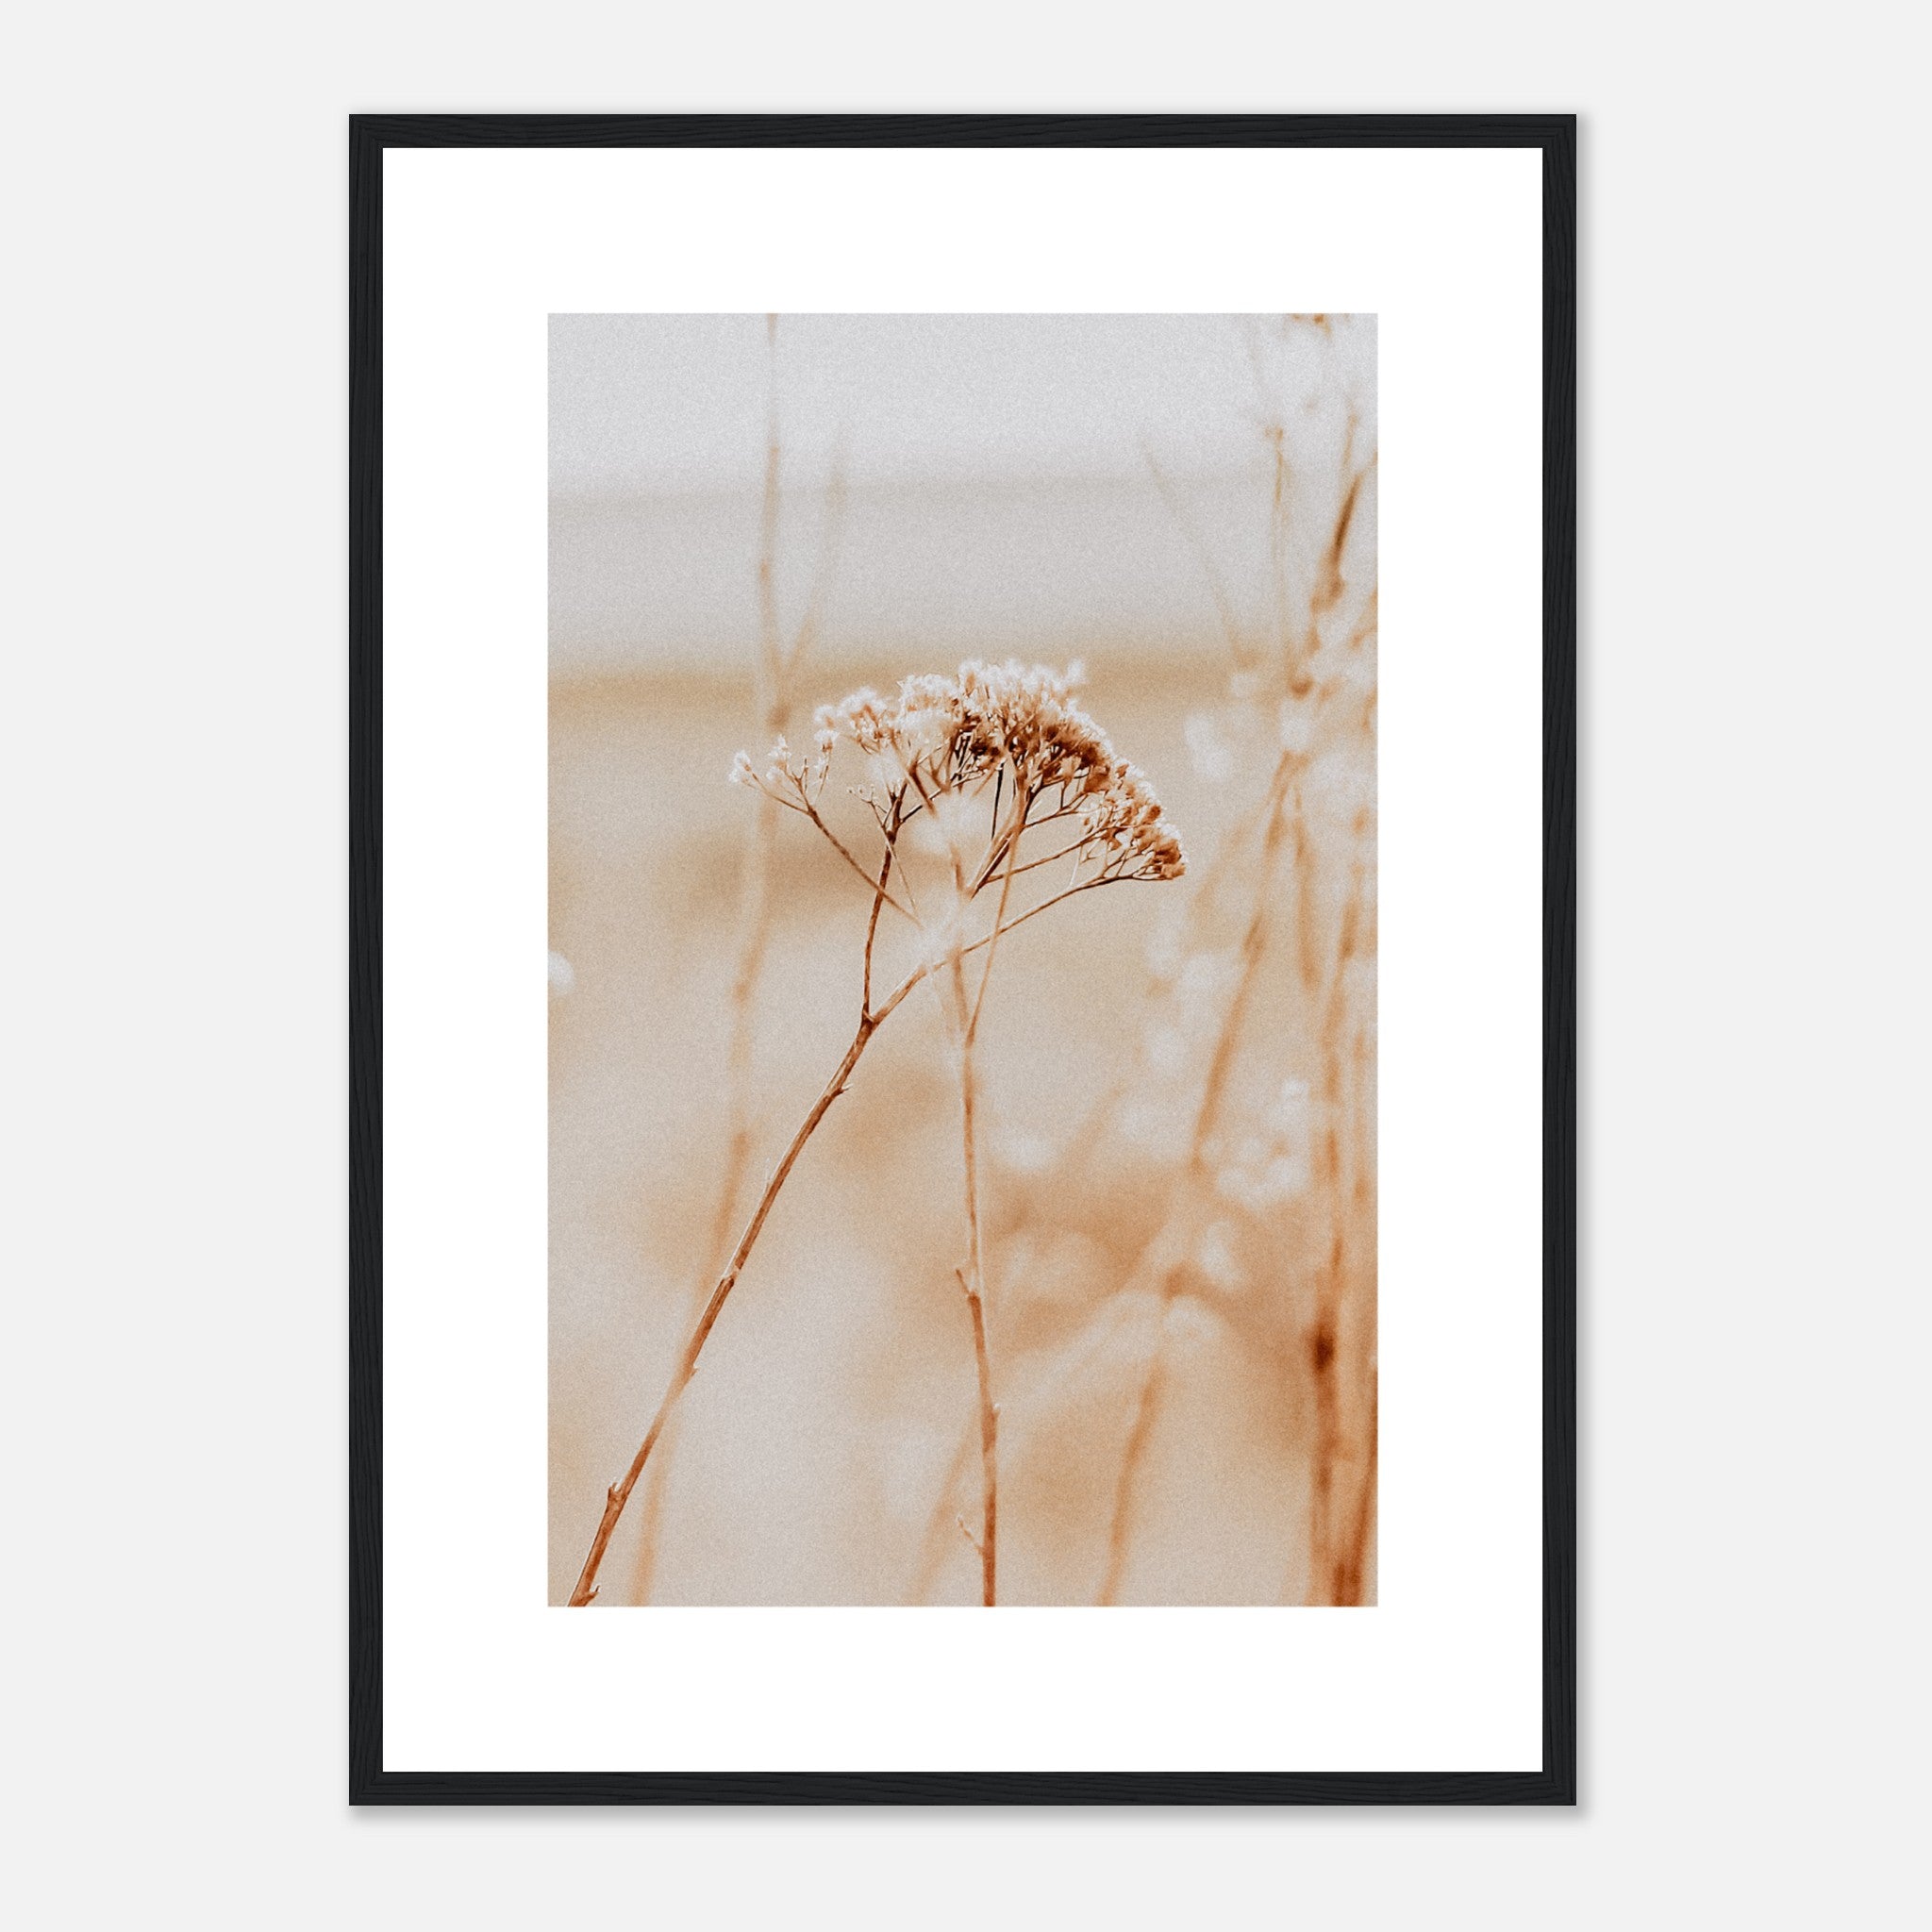 Dehydrated Dry Plants Poster